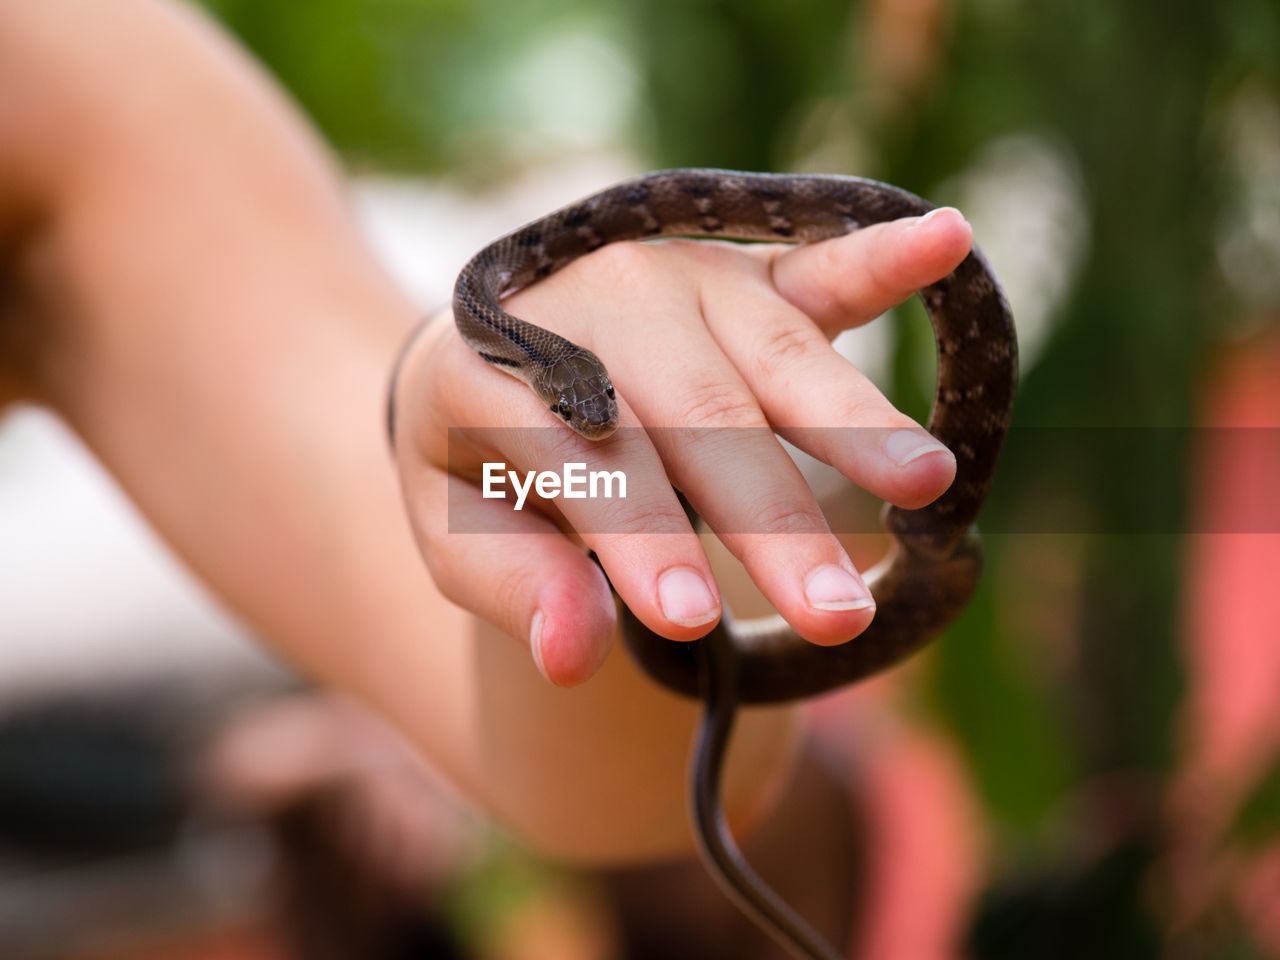 Portrait of snake on woman's hand